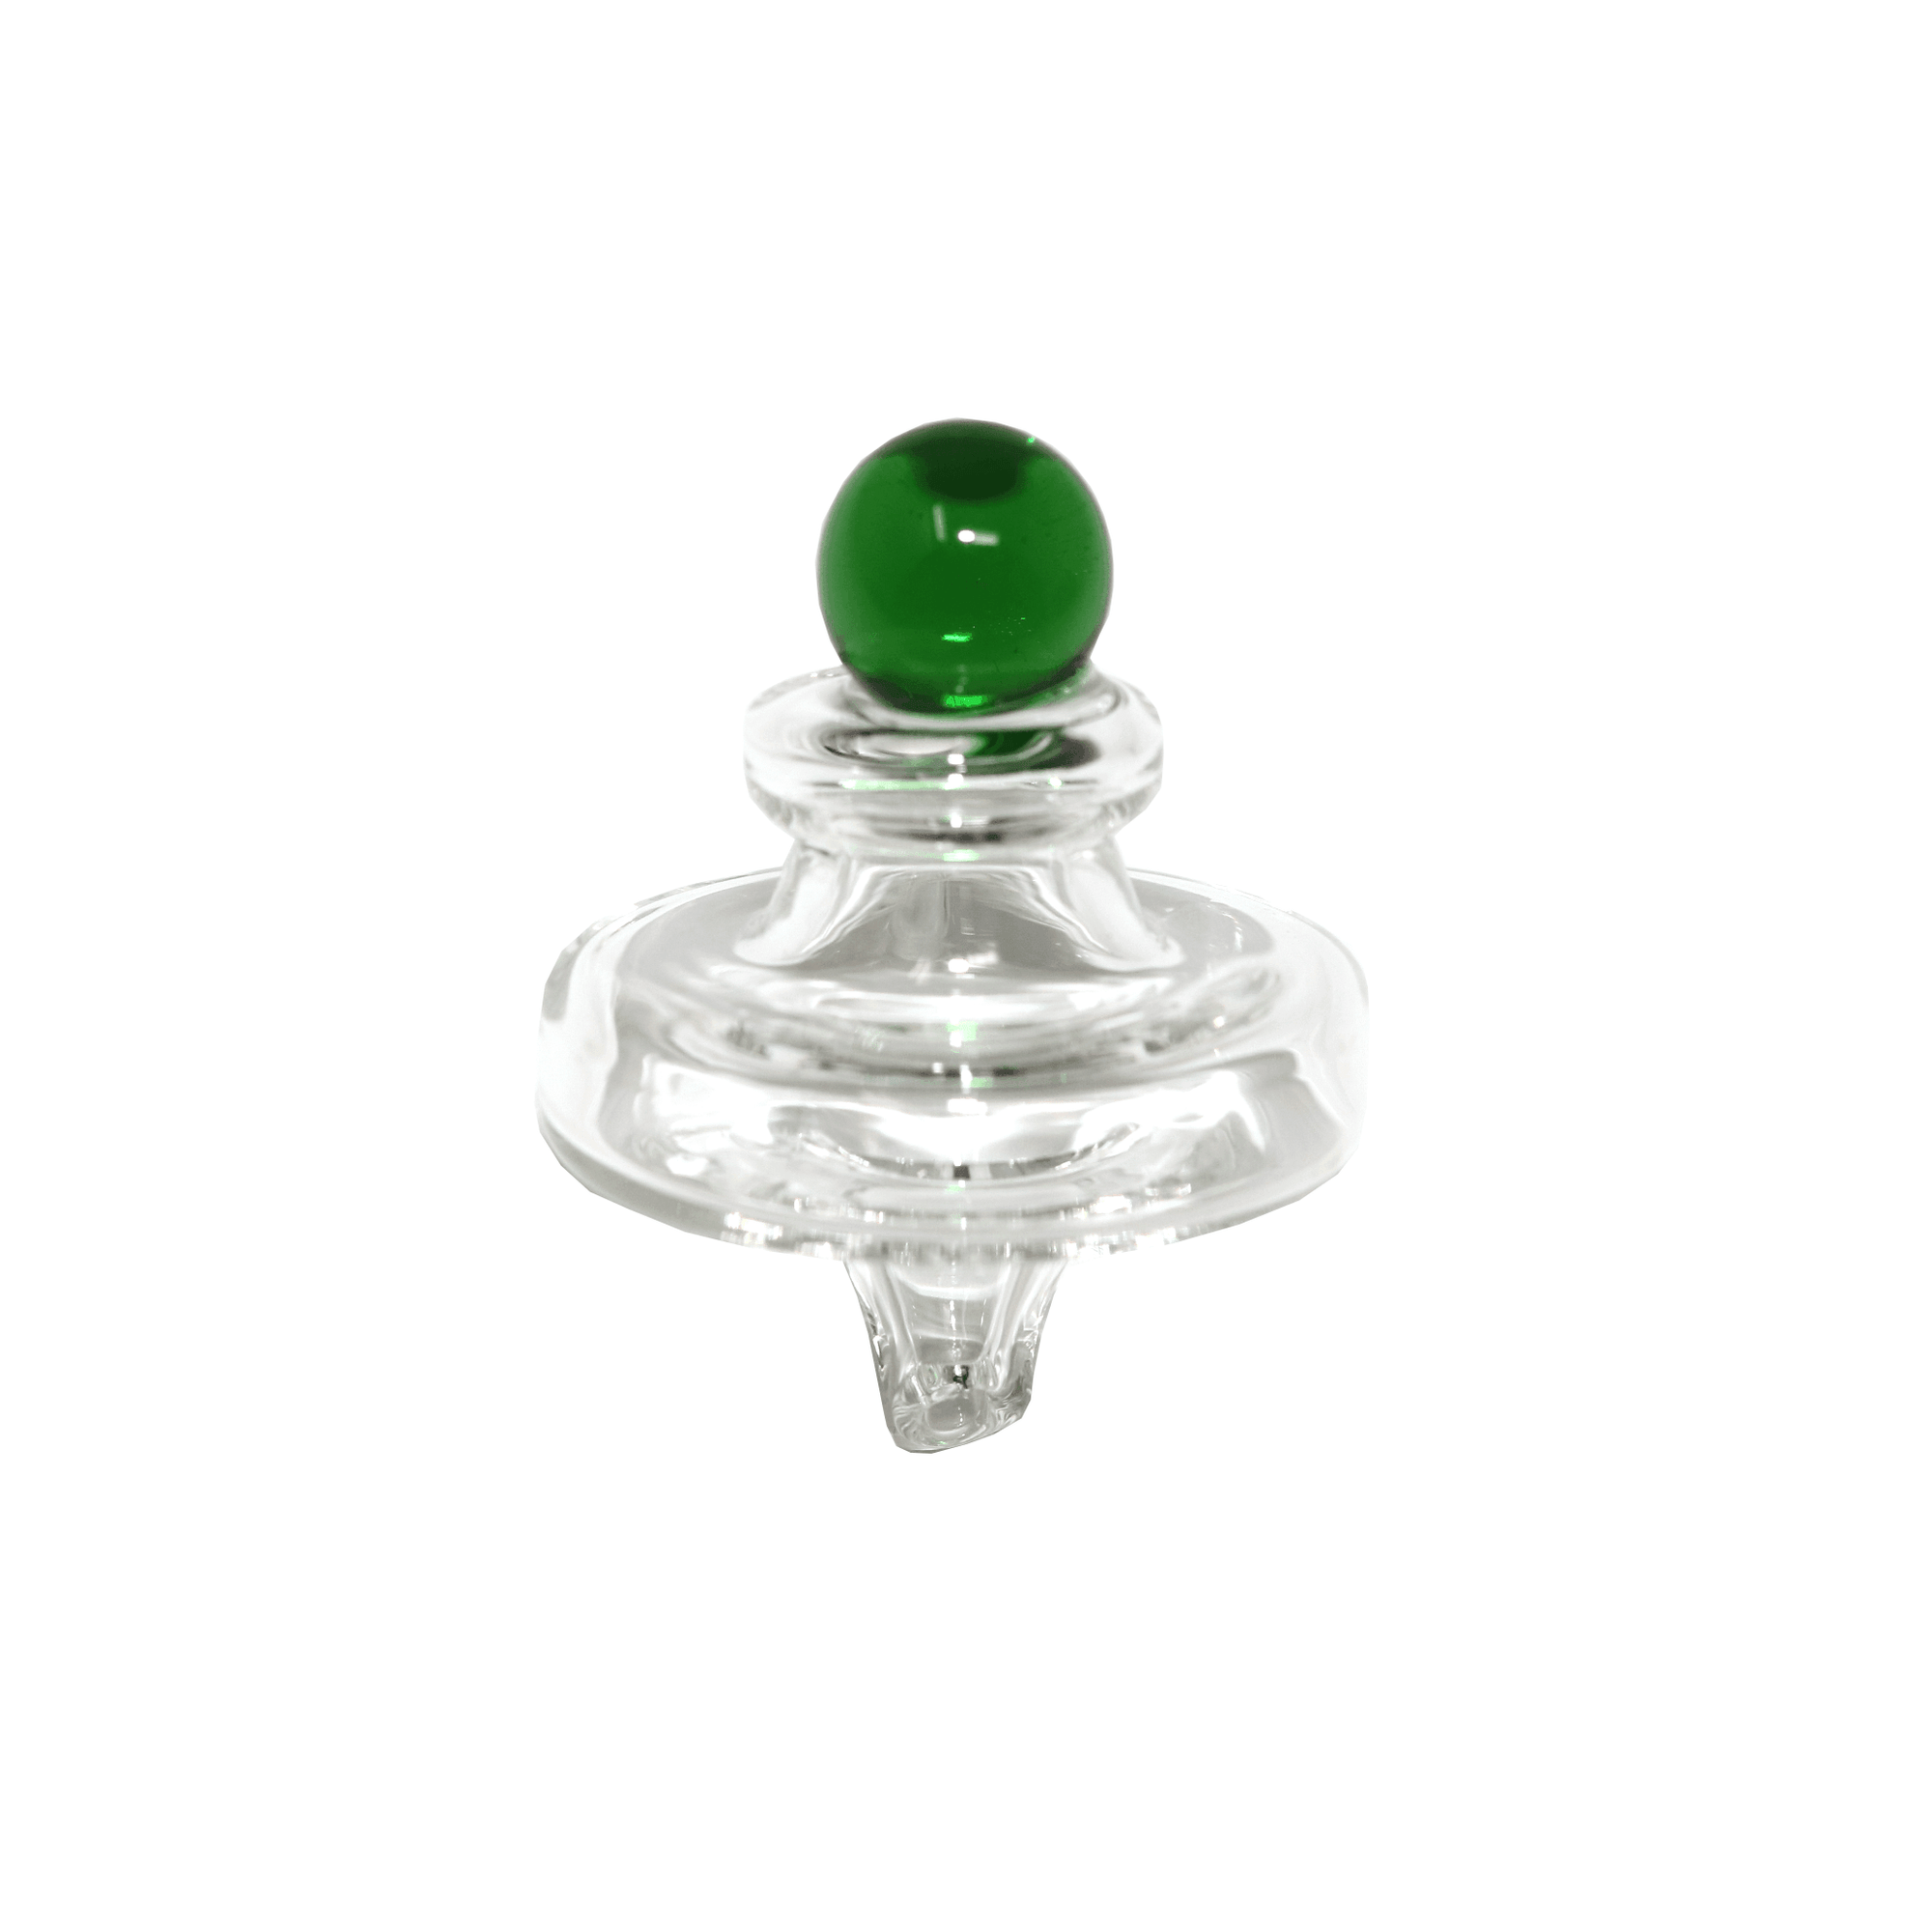 Quartz Banger Core Reactor 14mm Male With Saucer Cap | Saucer Cap View | the dabbing specialists